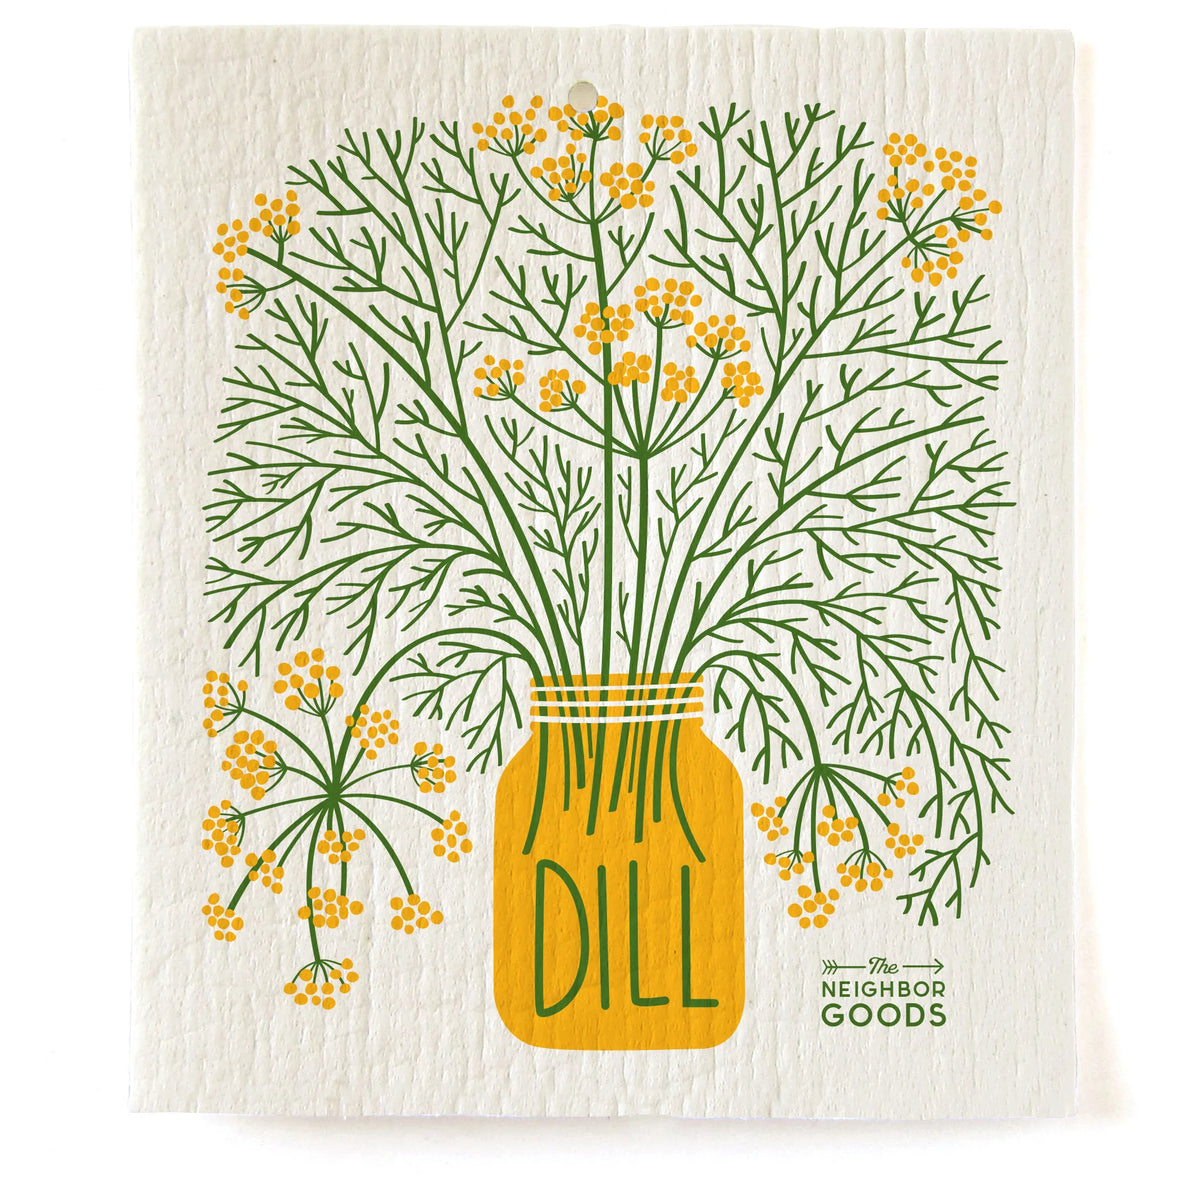 Big Dill Pickle Sponge Cloth – Museum of the City of New York